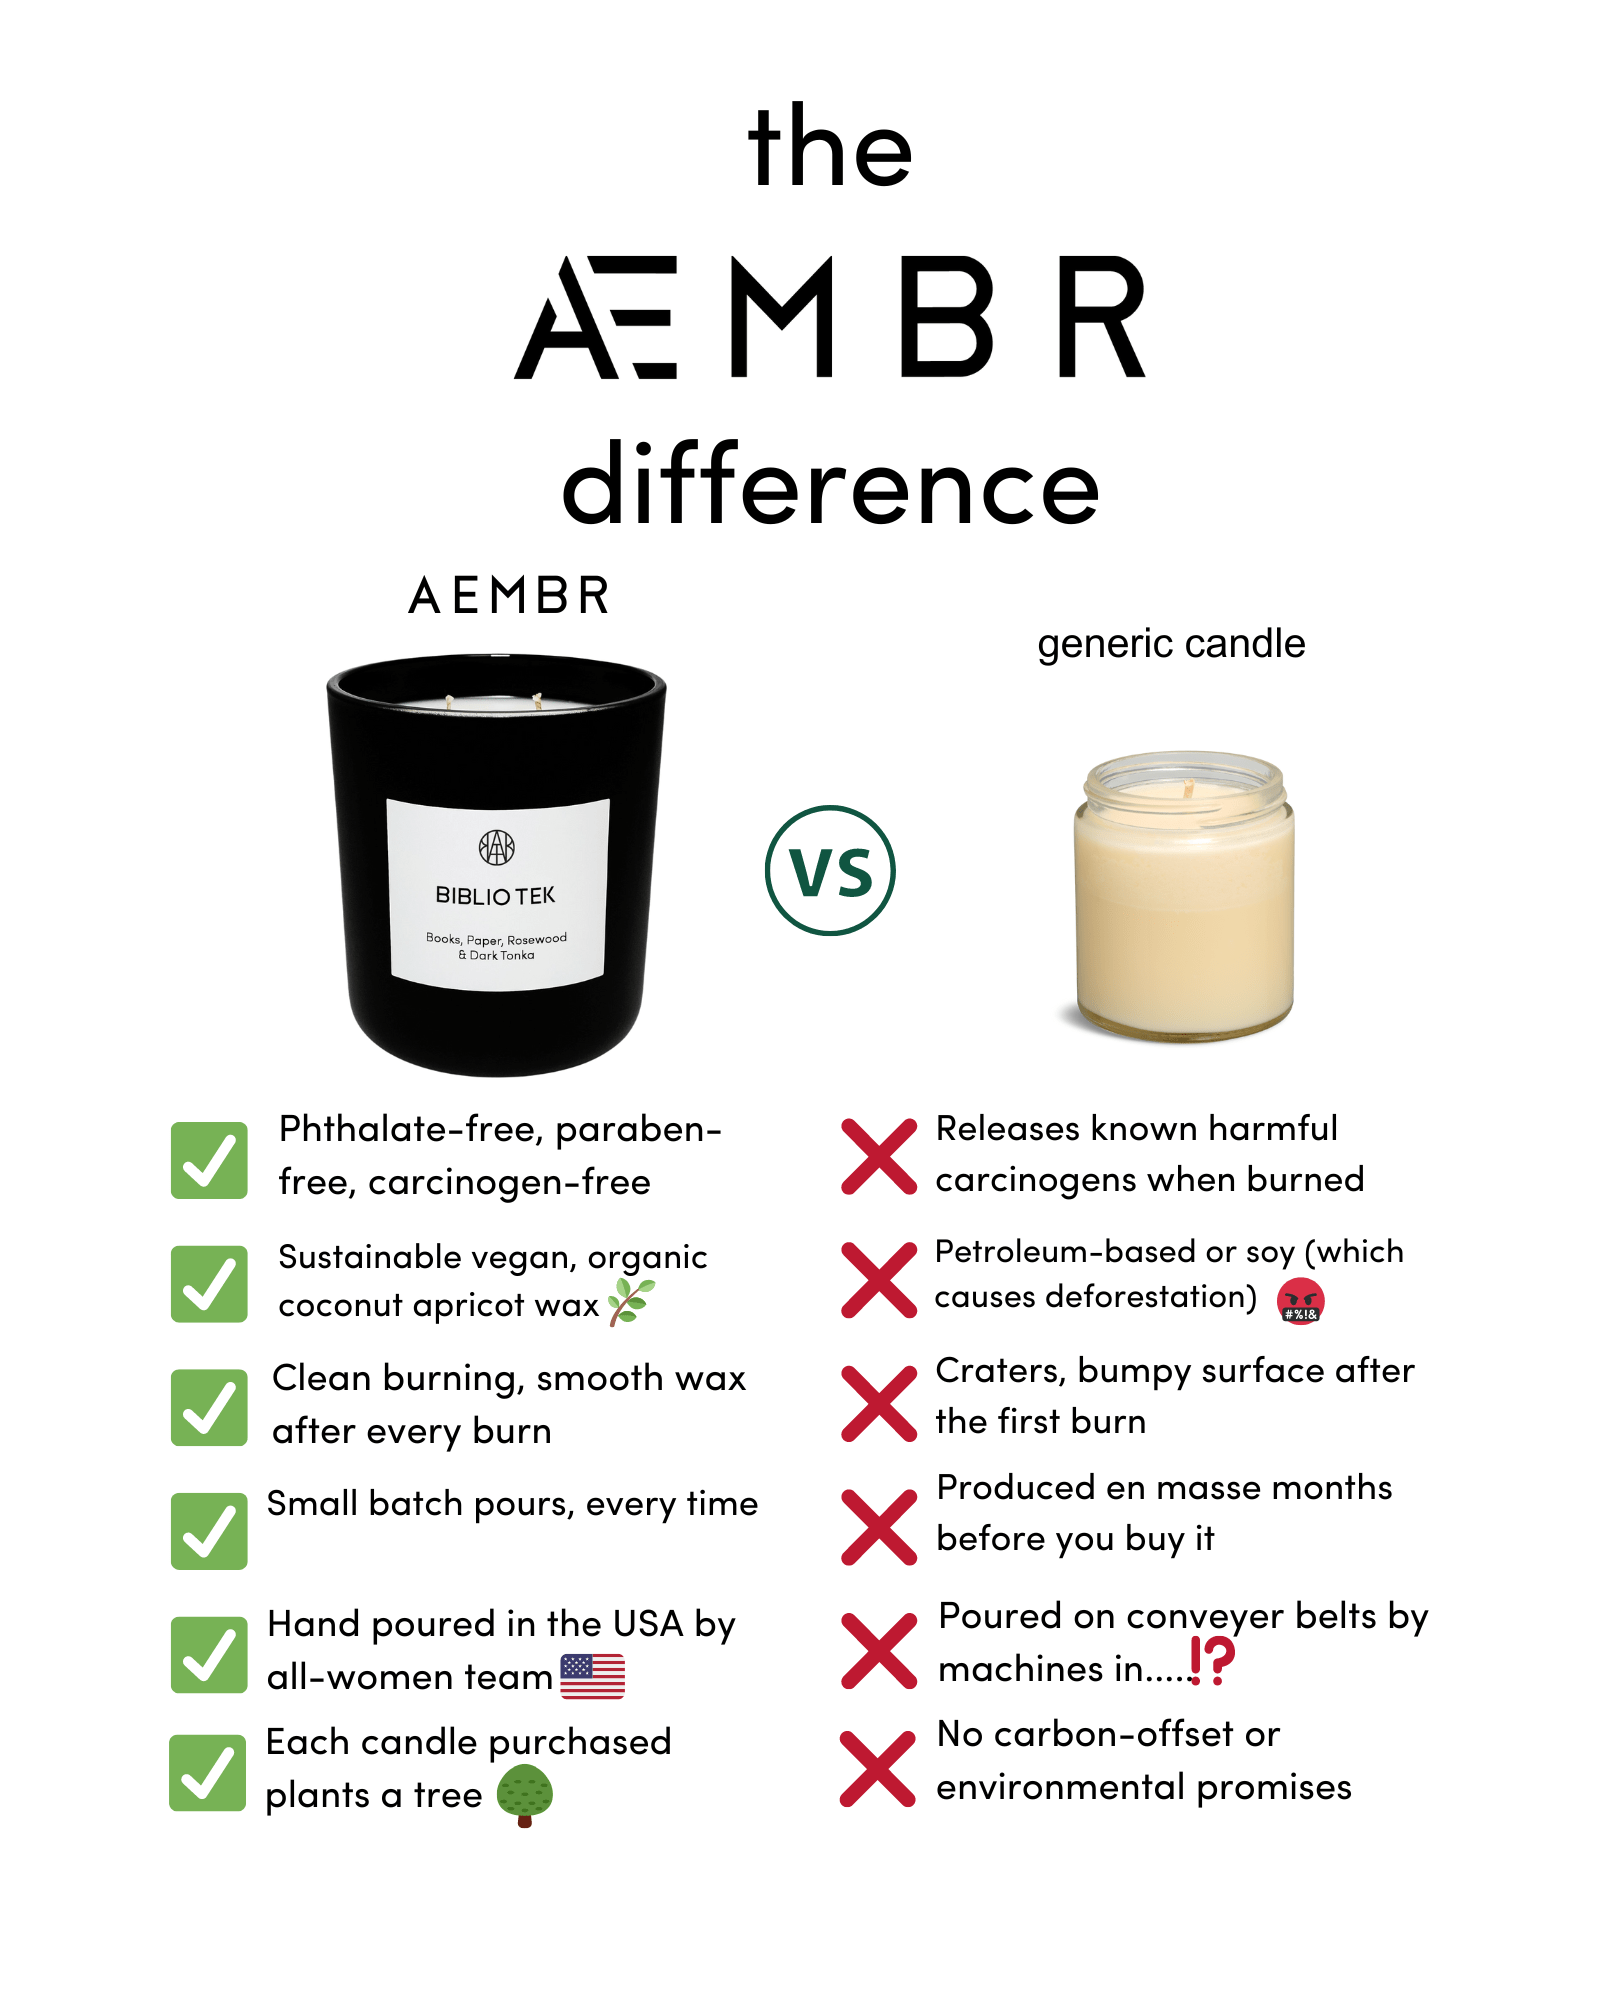 AMBER OUD - Classic Candle - AEMBR - Clean Luxury Candles, Wax Melts &amp; Laundry Care